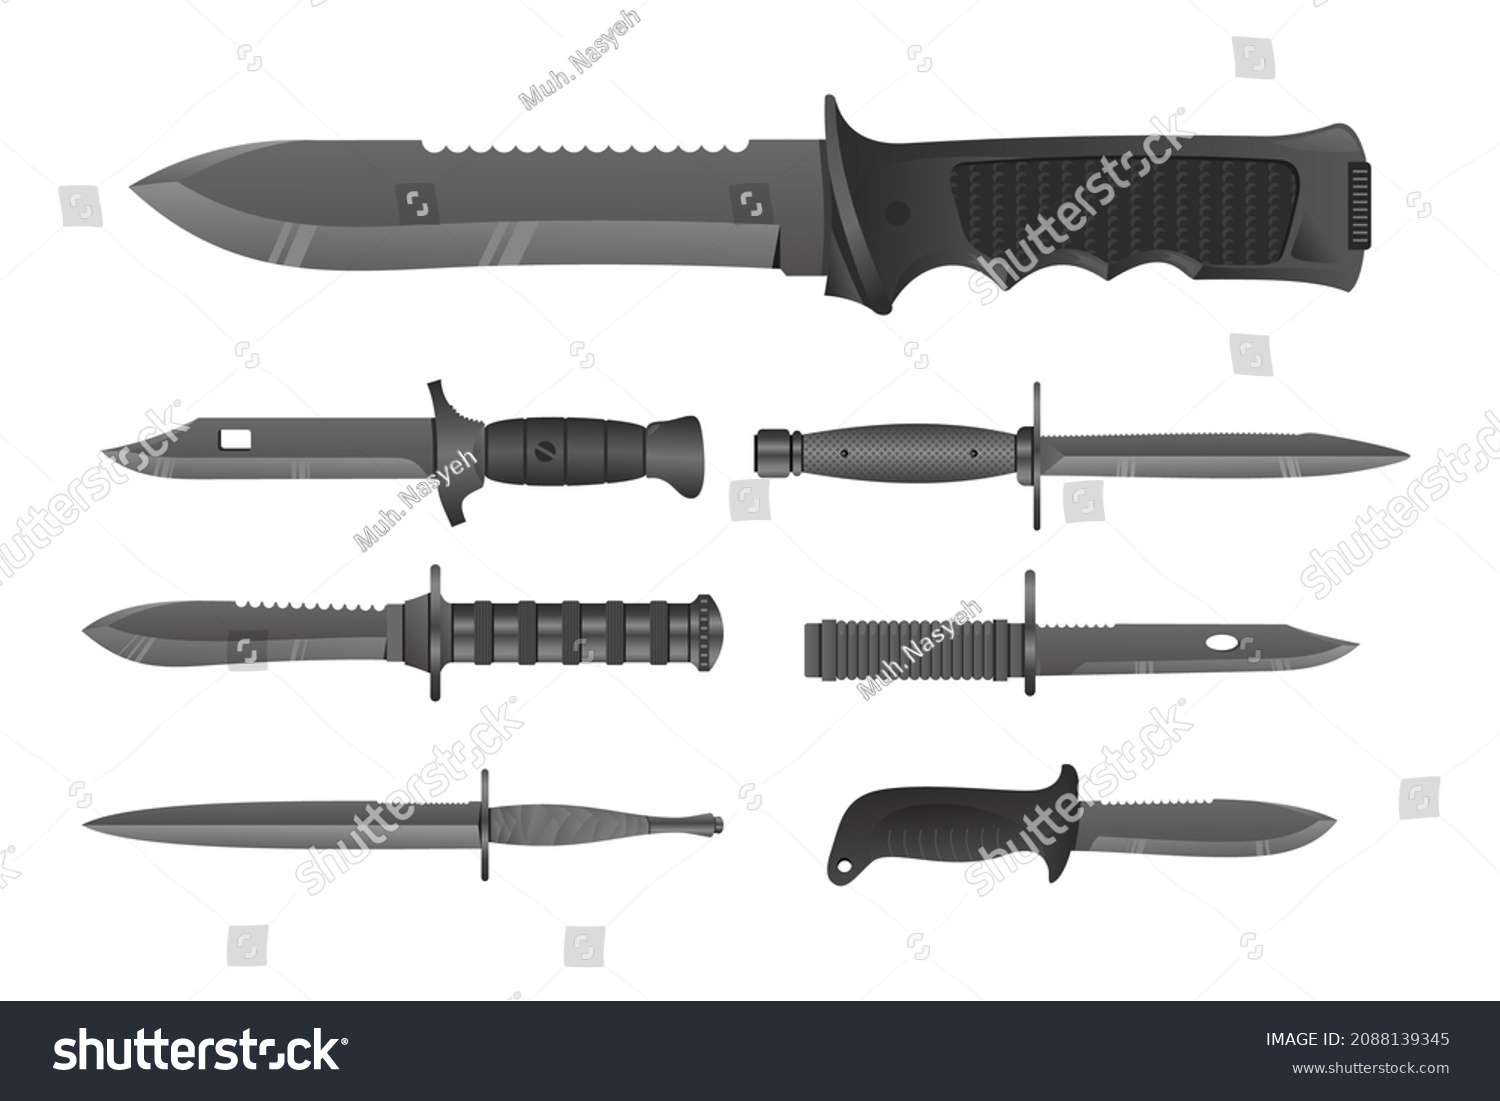 Realistic Military Knife Collection Vector File Stock Vector (Royalty ...